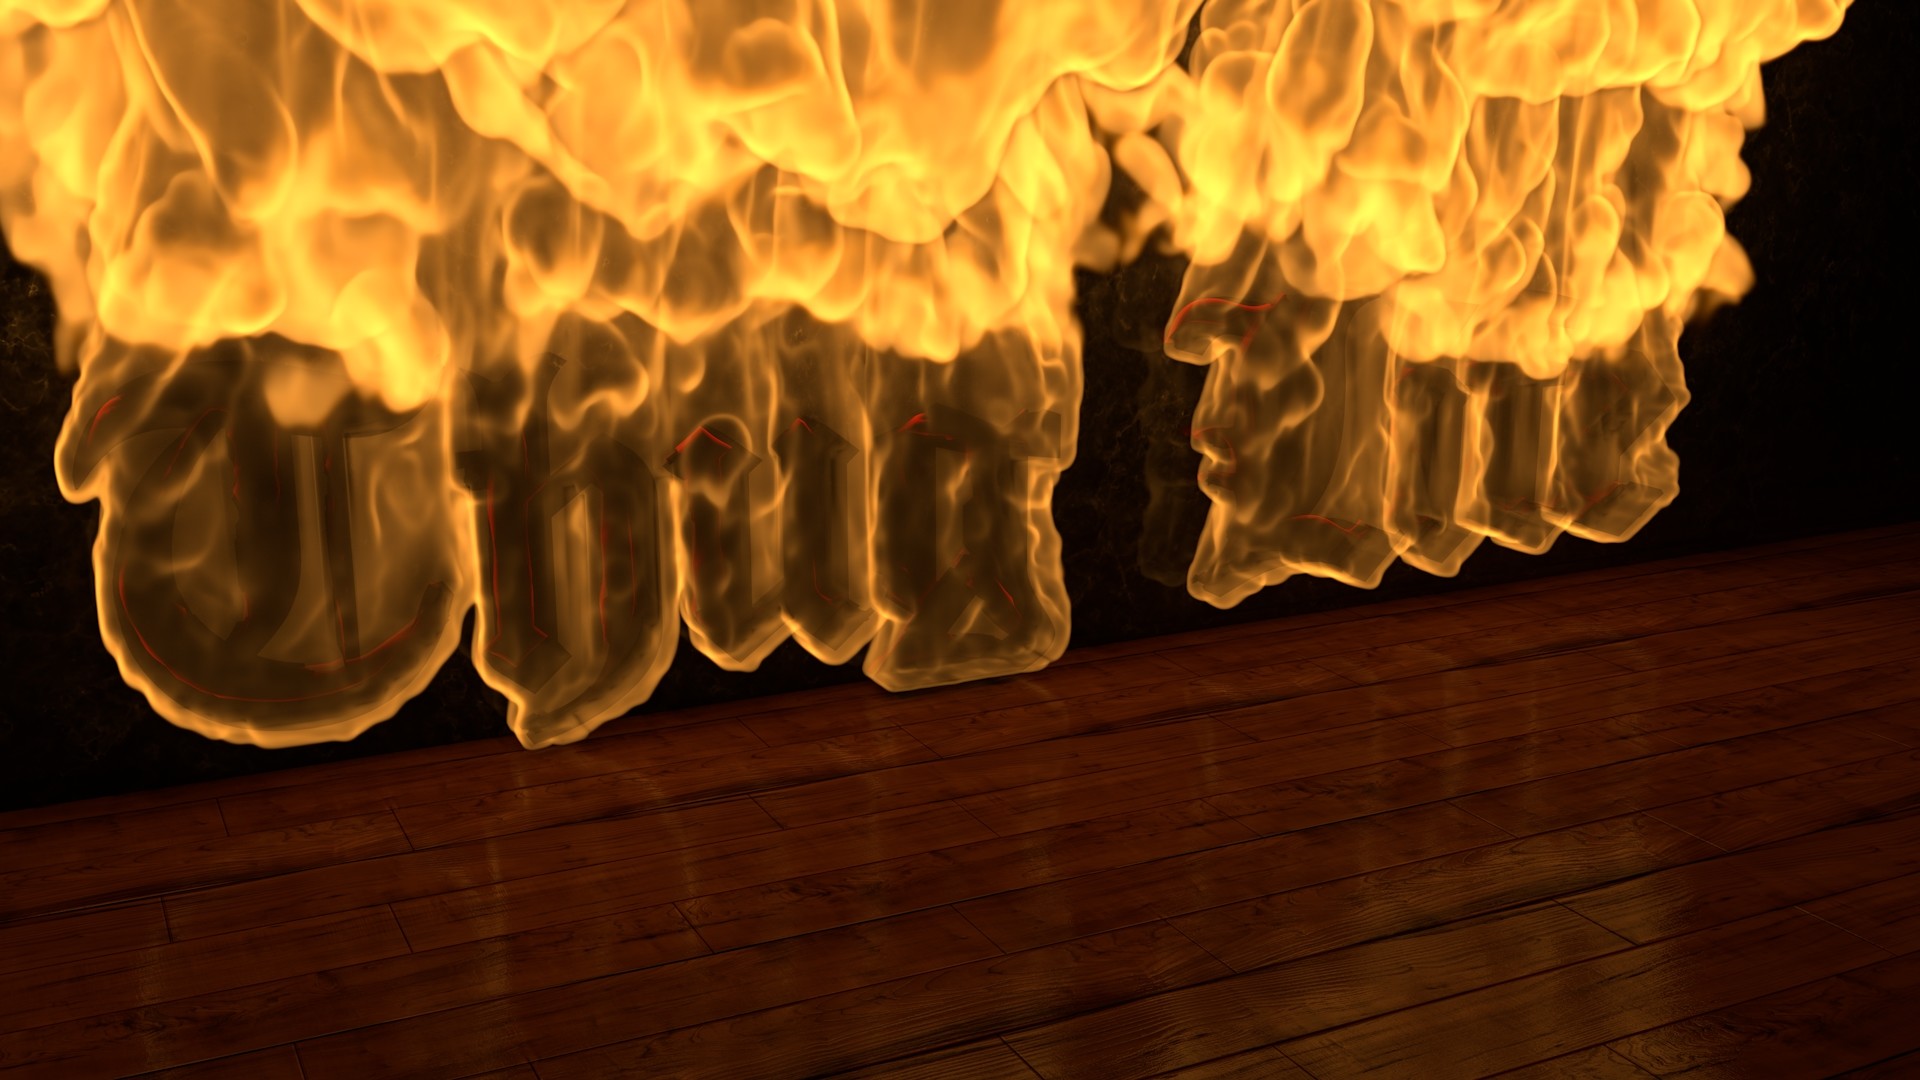 1920x1080 Thug Life Fire by curtisblade Thug Life Fire by curtisblade